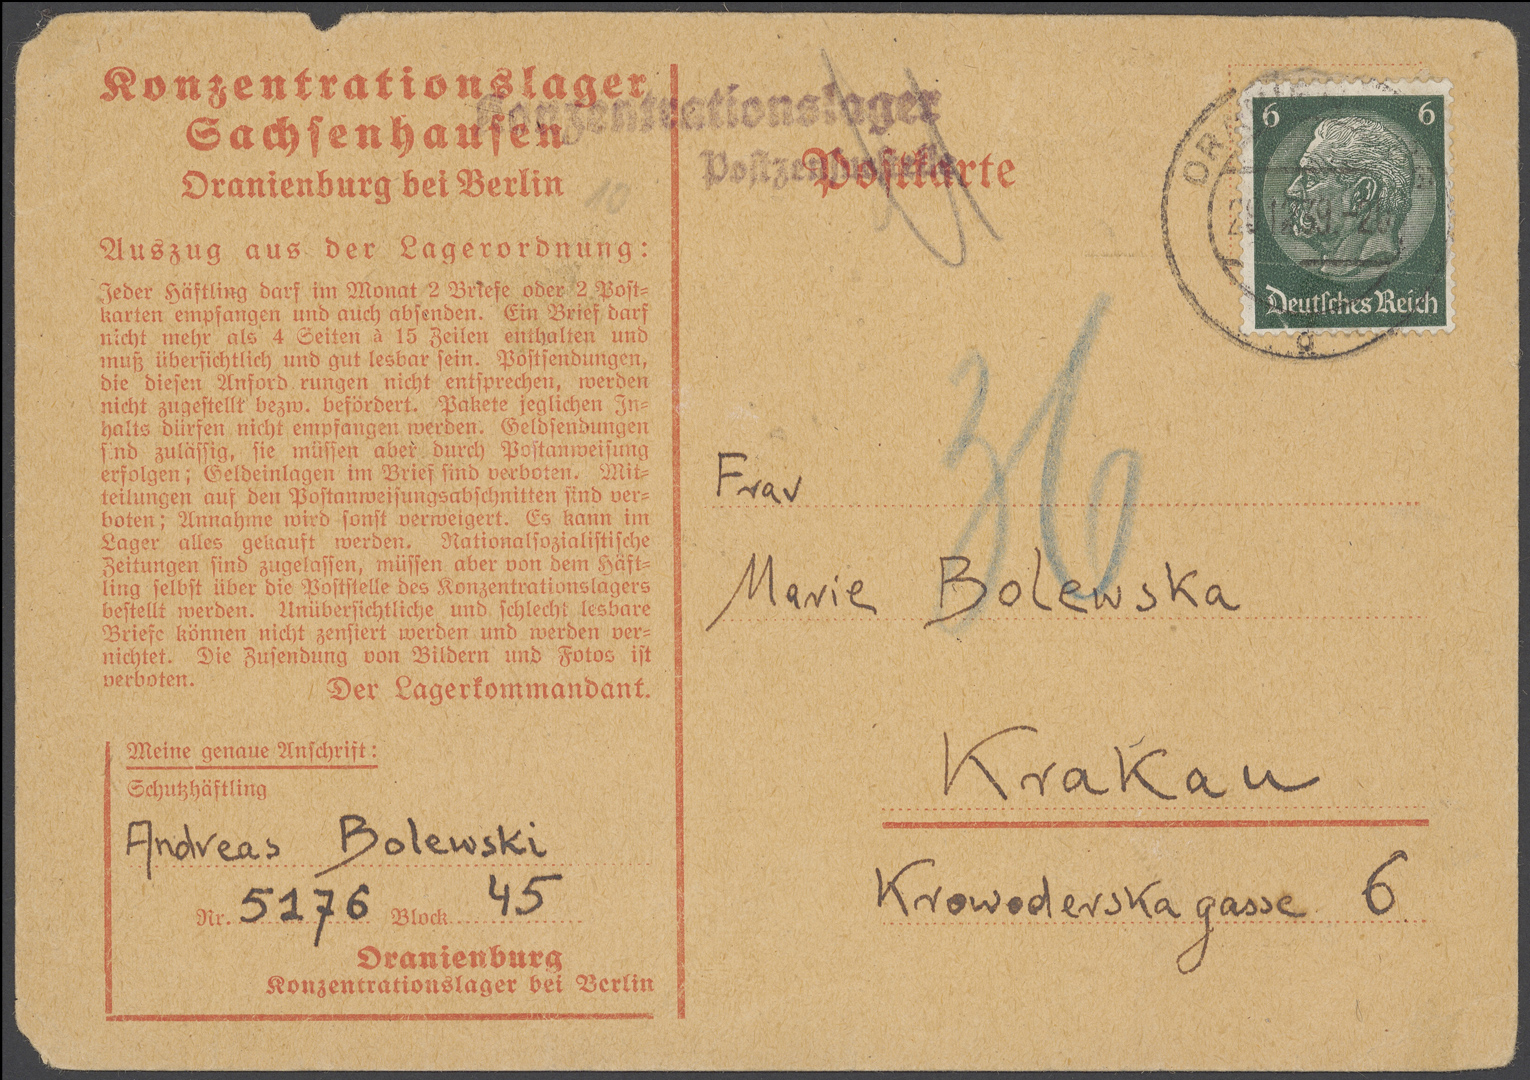 A post card from the concentration camp.